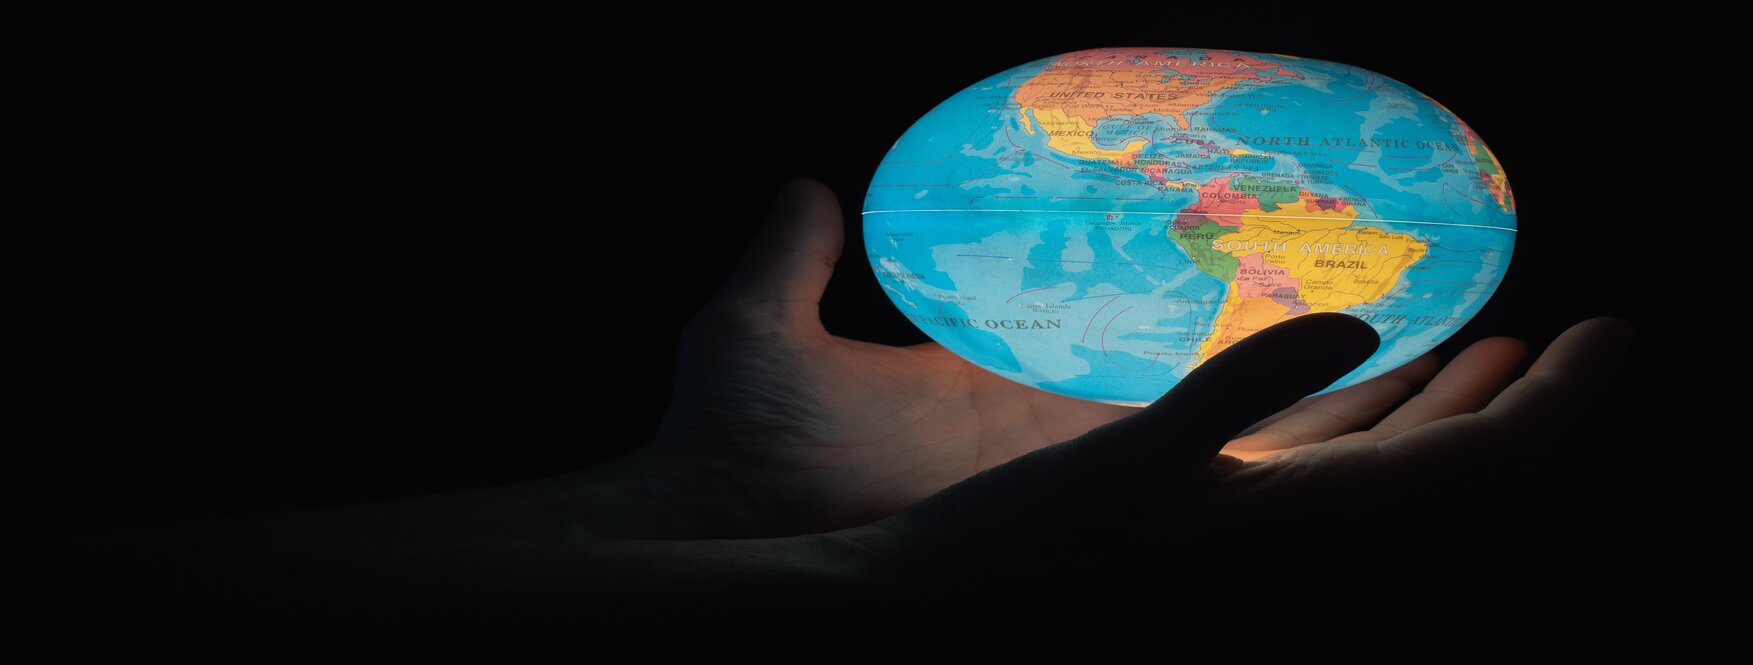 Black background with a hand holding a blue Earth globe